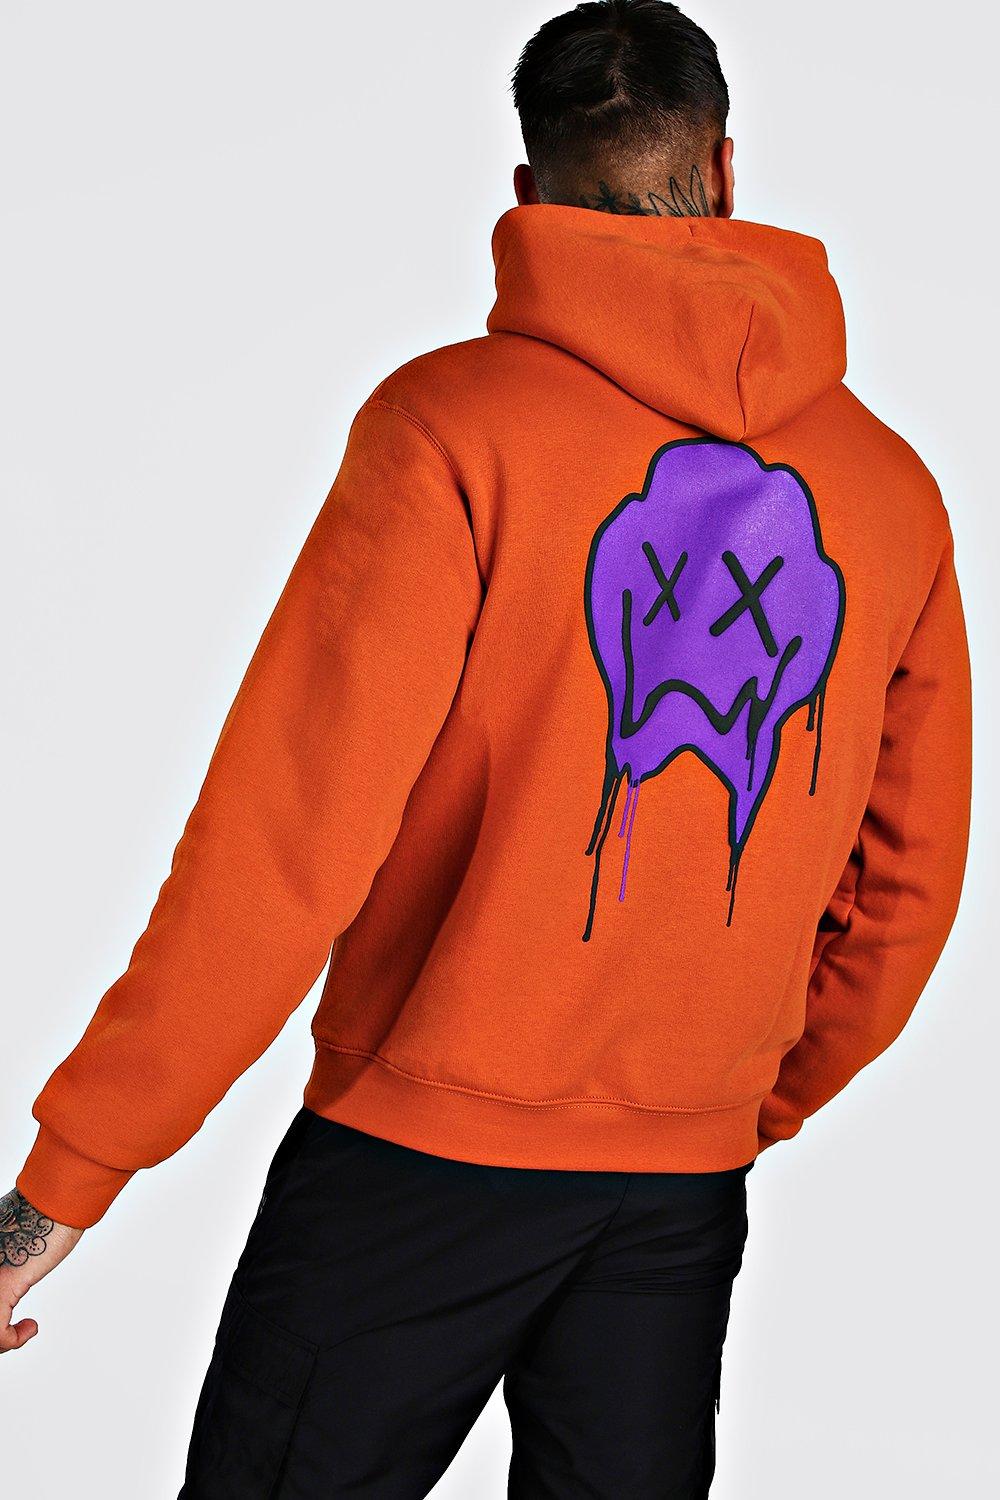 hoodies that zip up over the face